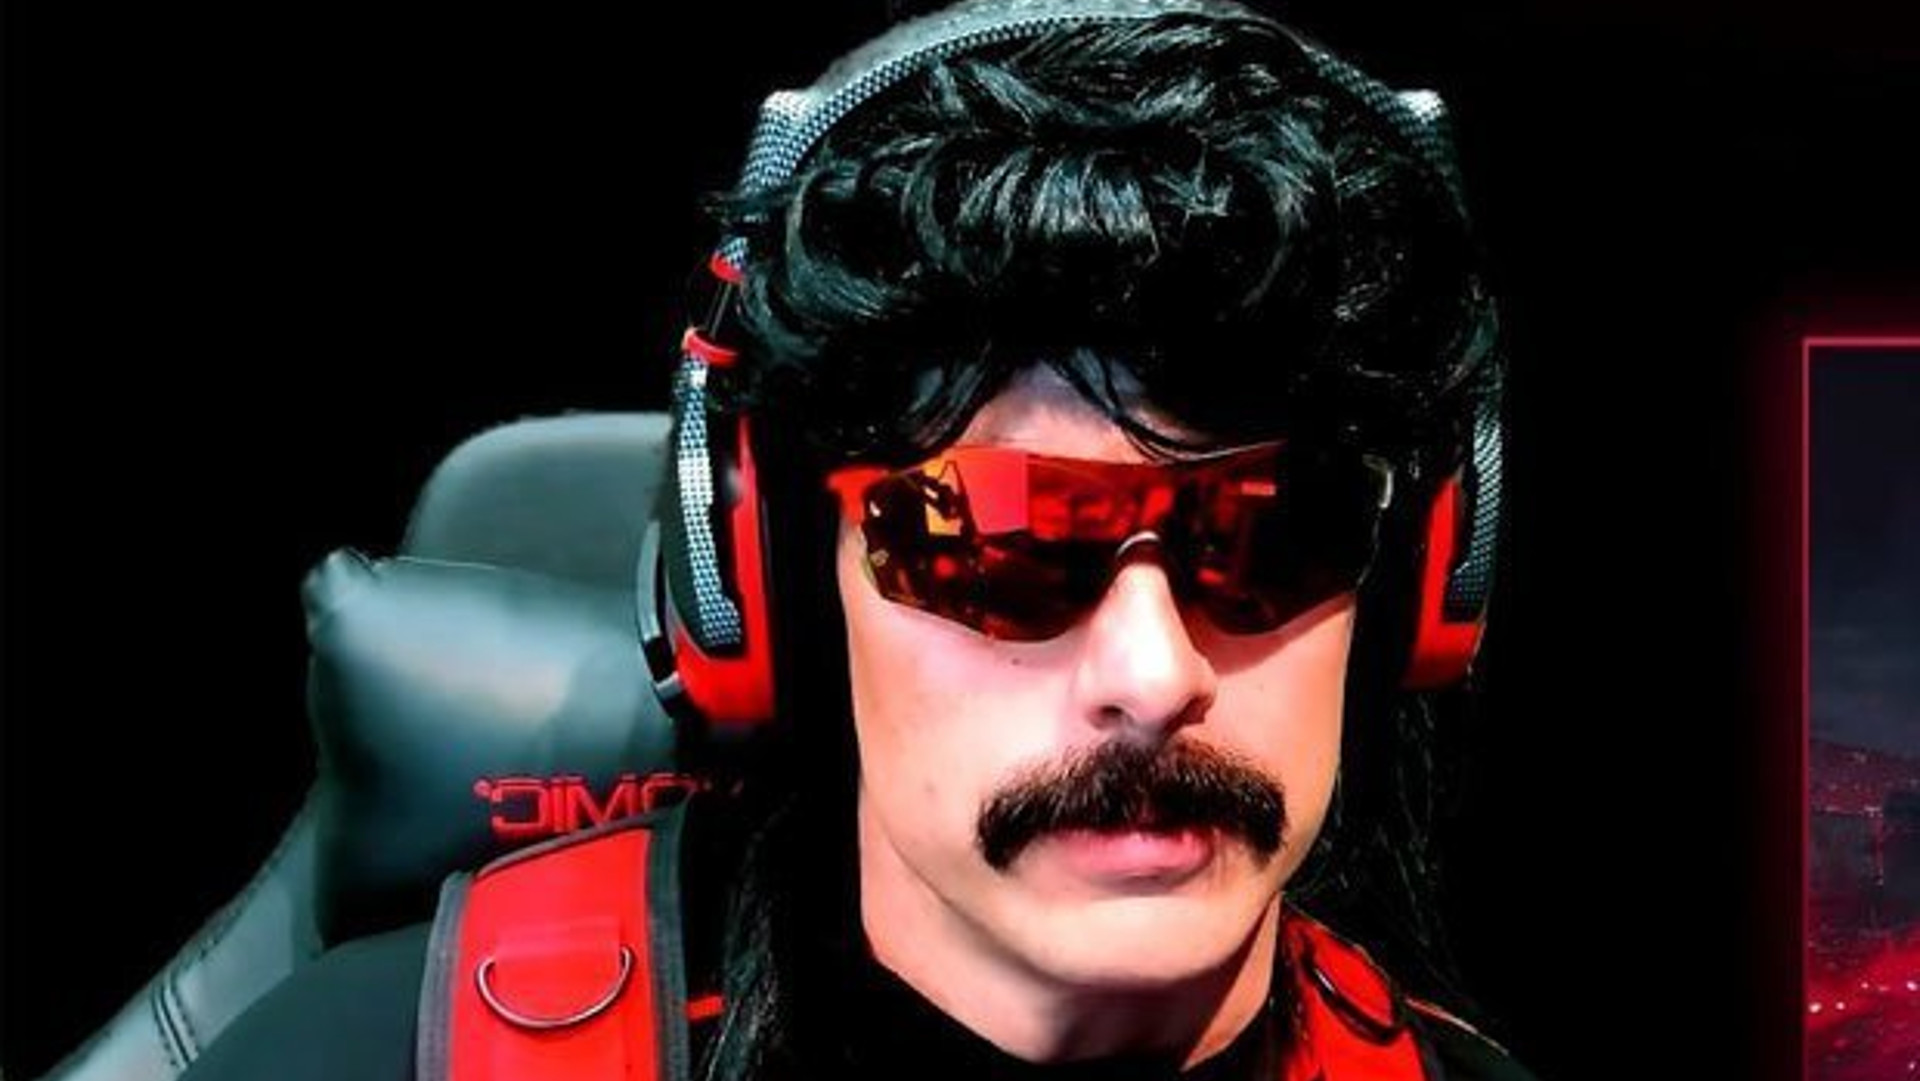 Dr disrespect twitter banned